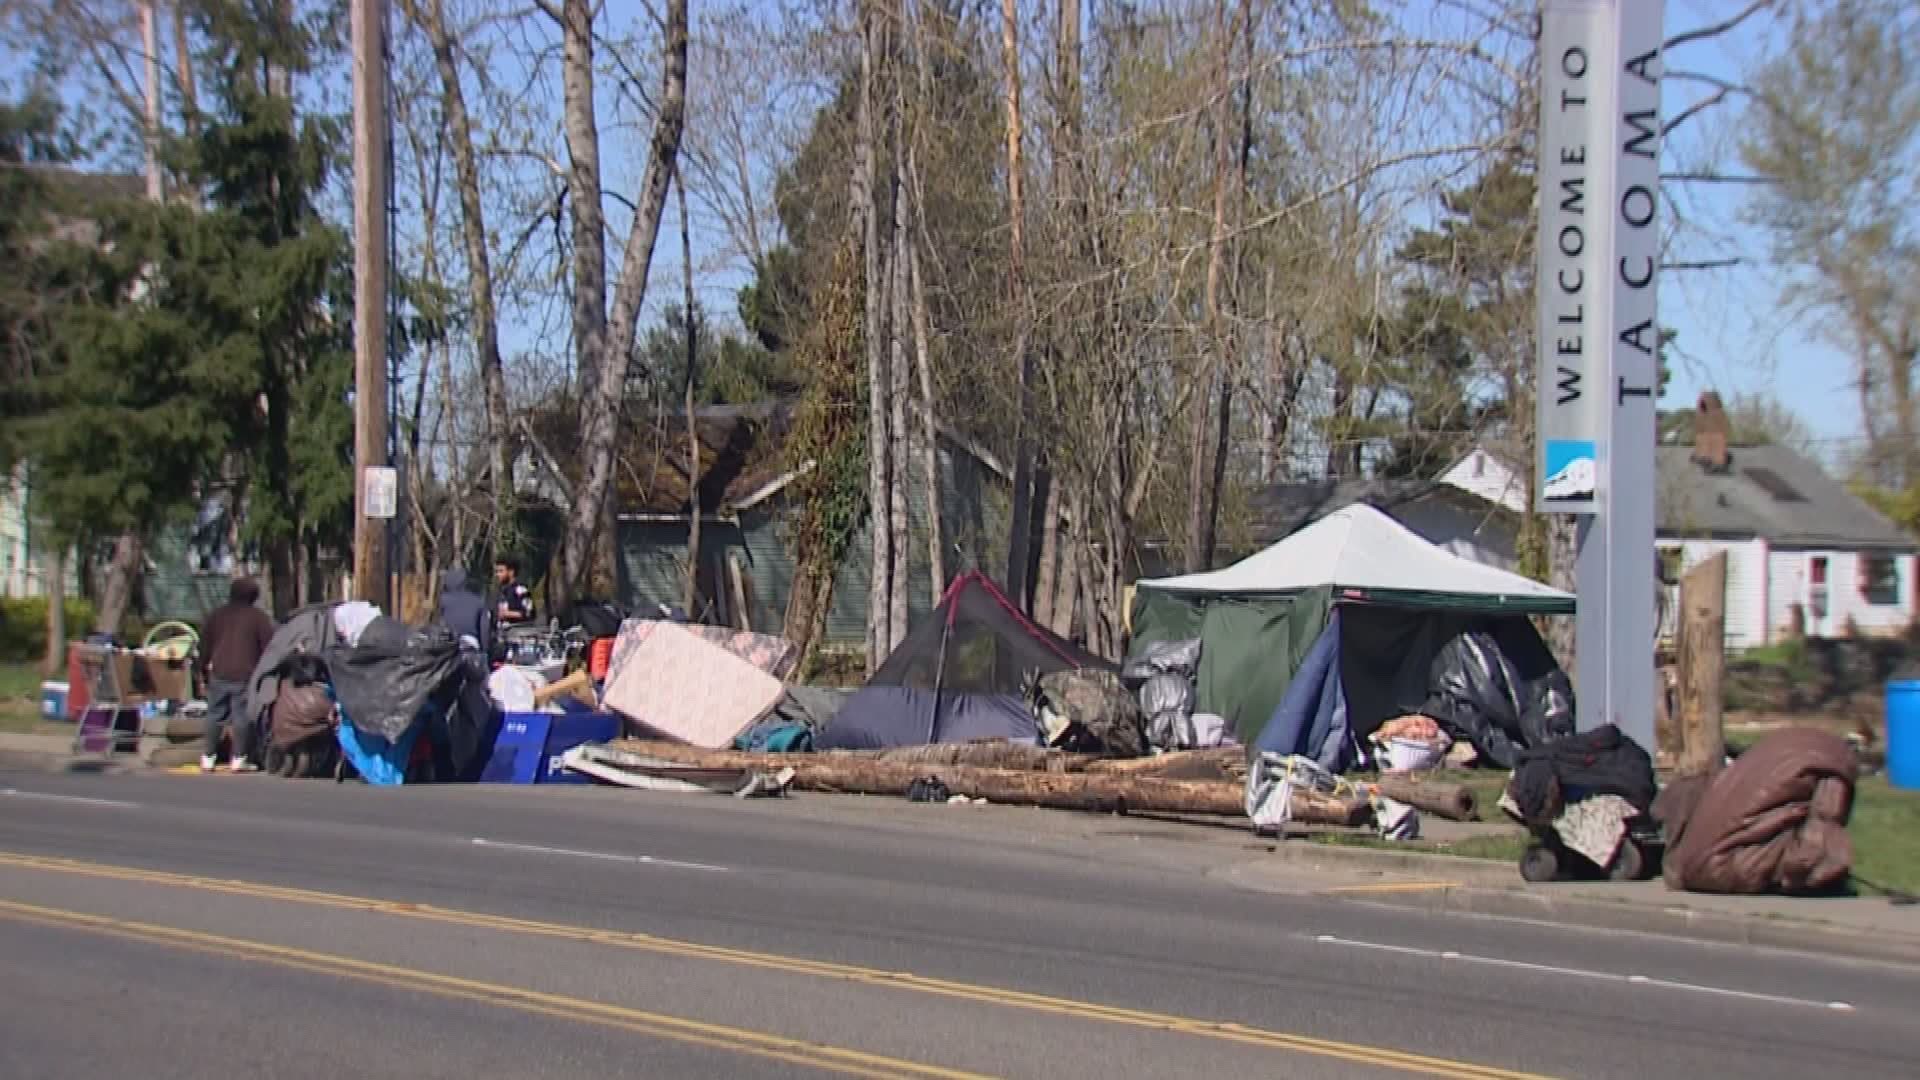 Monday's vote means someone camping on city property could be charged with criminal trespassing if they refuse shelter or refuse to leave city property.